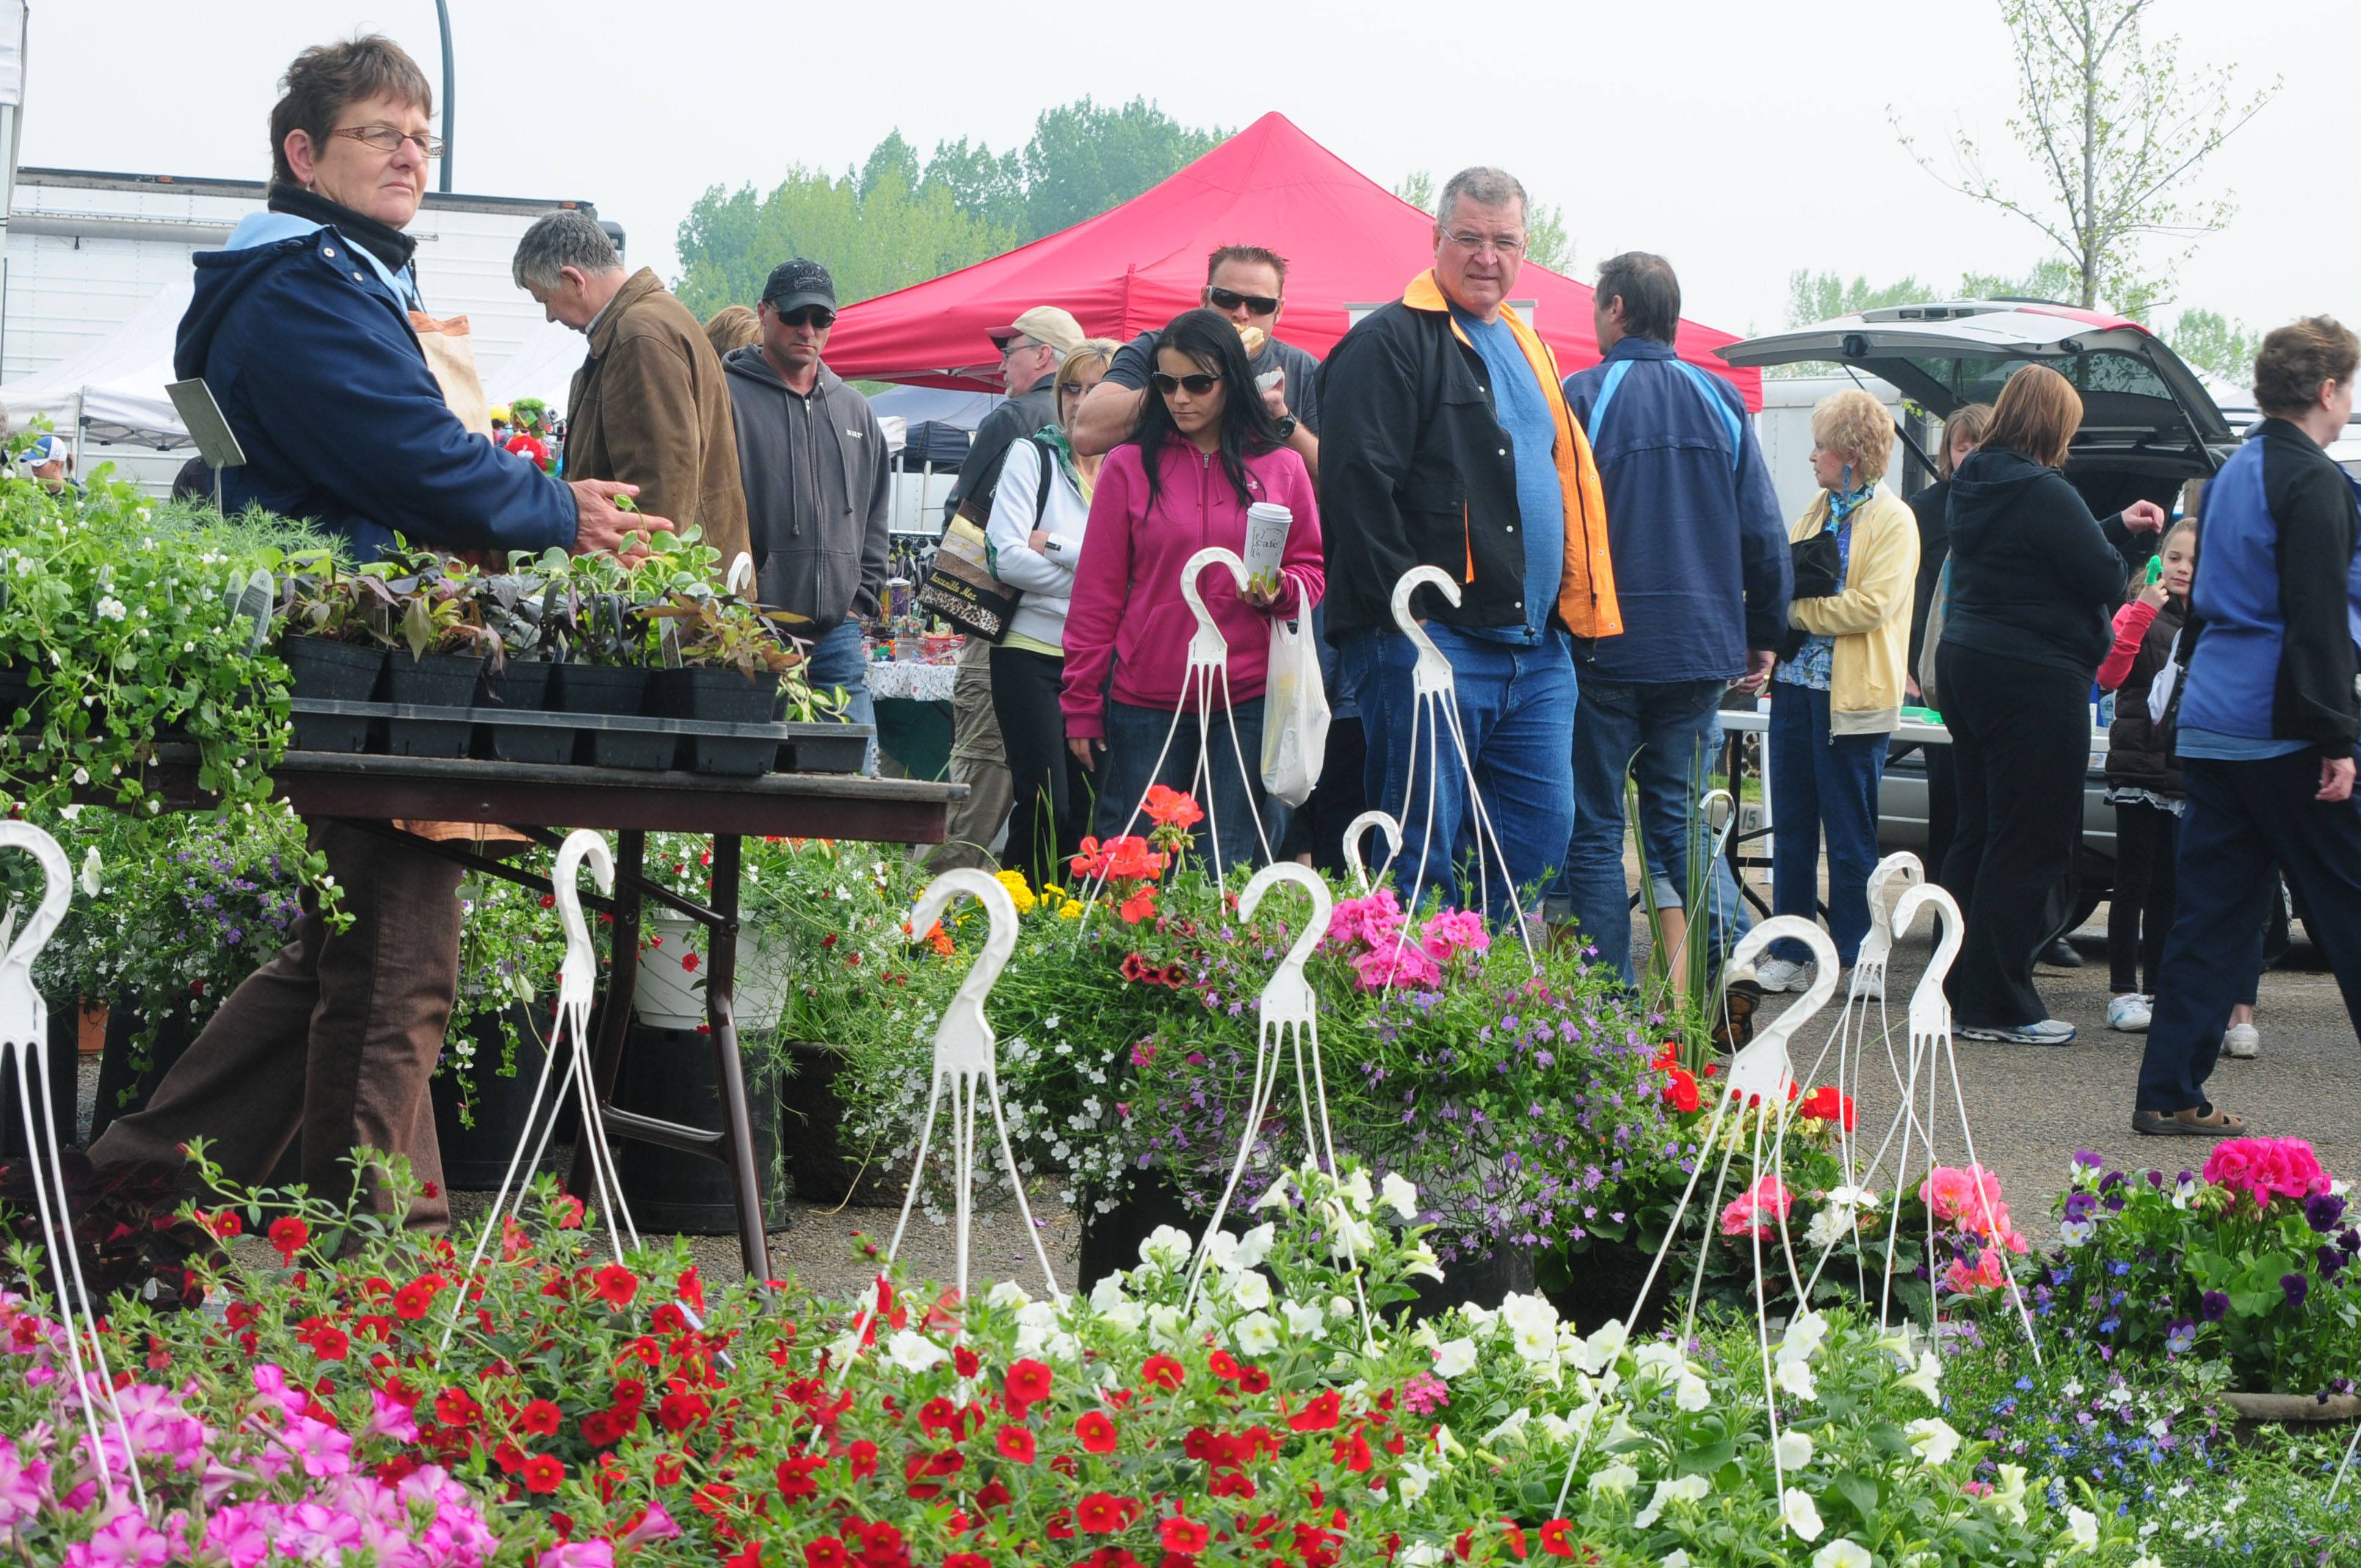 SELECTION- Many Red Deerians made their way to the downtown Market this past weekend at the Red Deer Arena to browse some of the local produce and flowers.